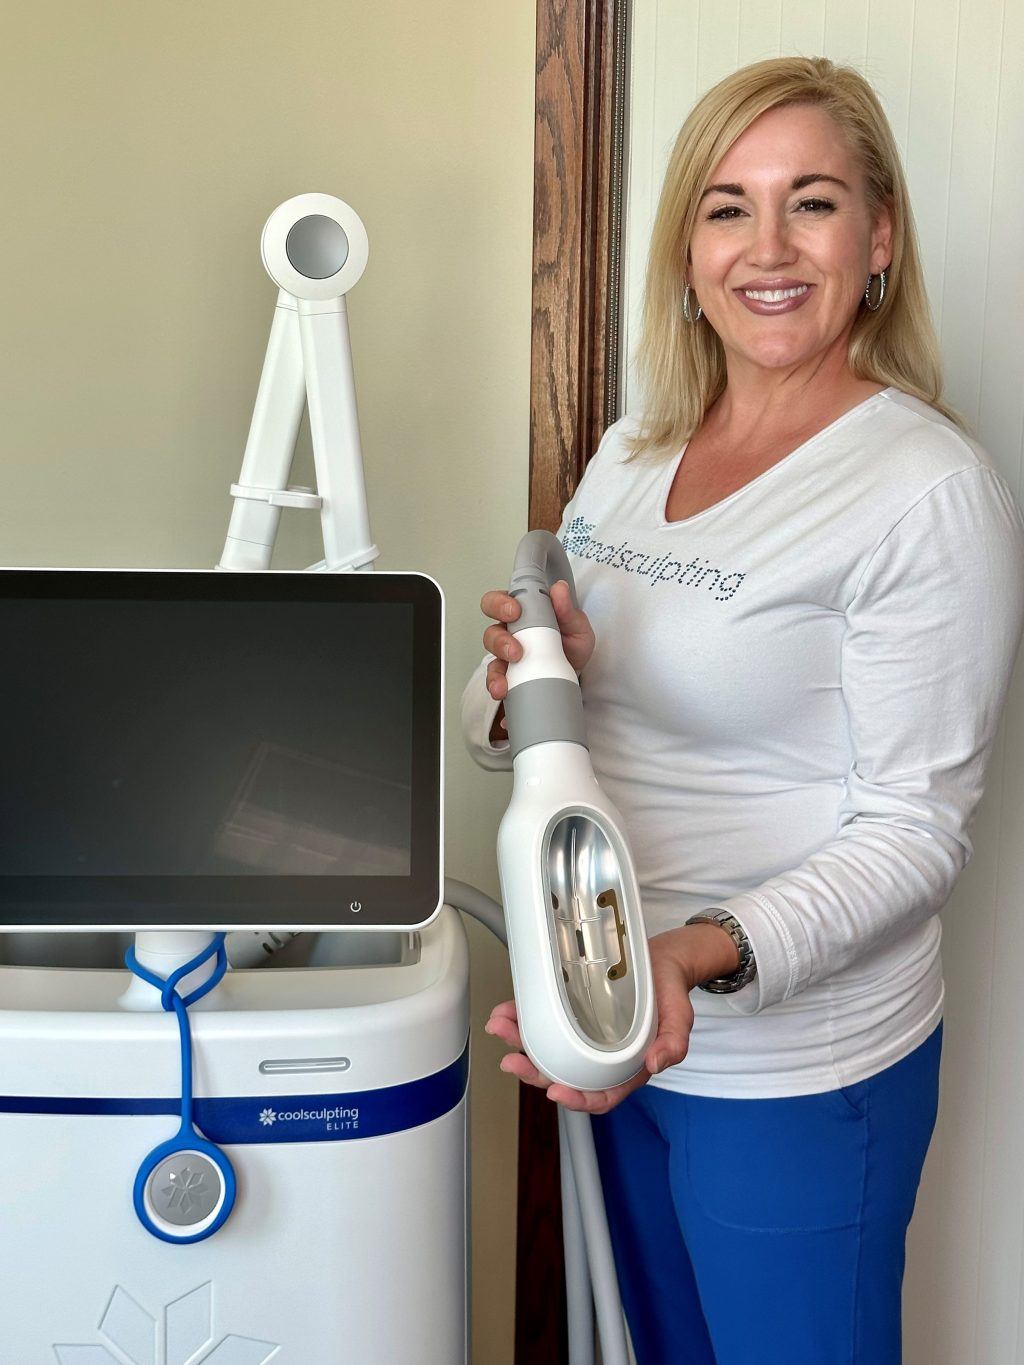 staff member with coolsculpting device